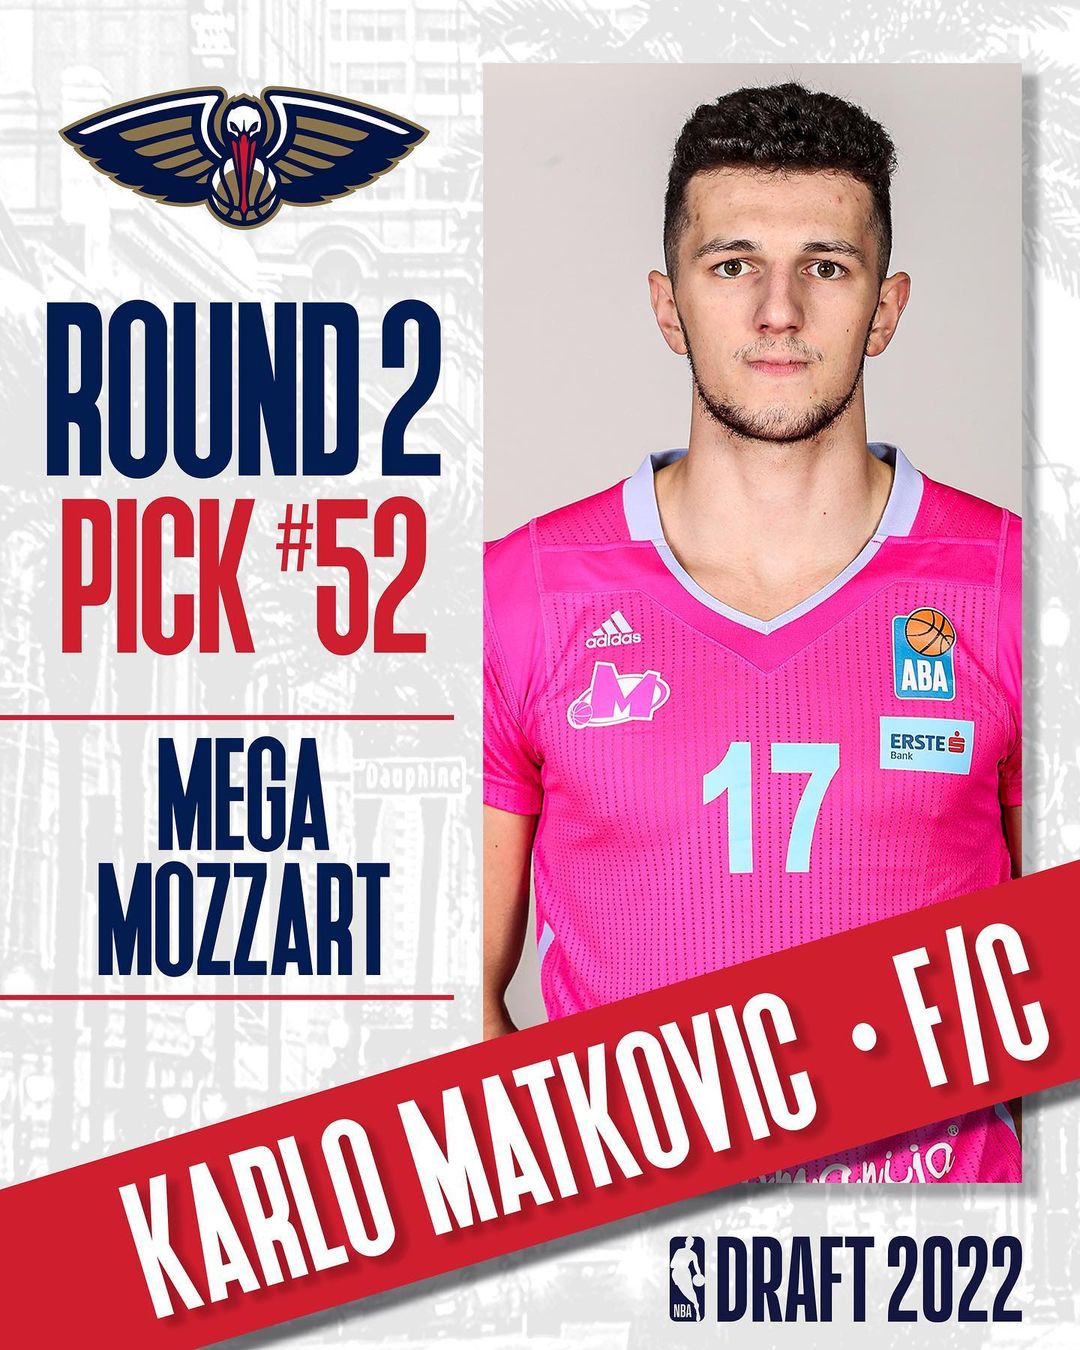 With the 52nd pick in the 2022 NBA Draft, the Pelicans select forward Karlo Matk...